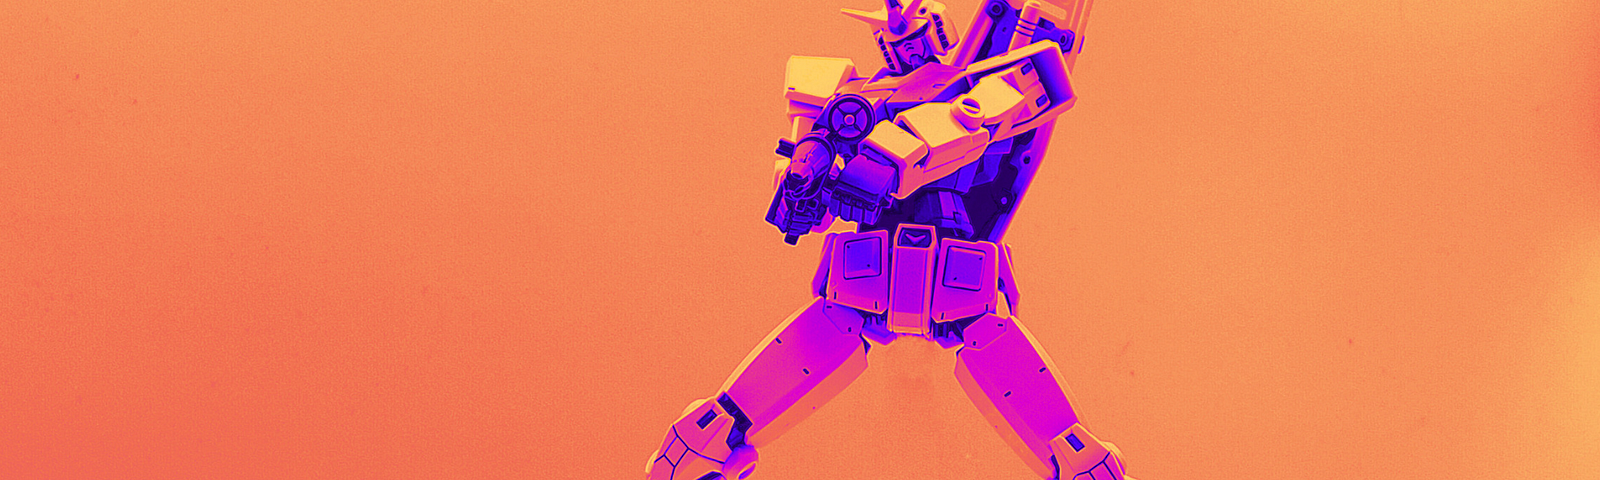 Neon orange, pink, and purple transformer model toy jumping mid-air and shooting at the camera in an action shot. Stylized image, comic-book like. Cover image for Comet ML’s article “Explainable AI: Visualizing Attention in Transformers”